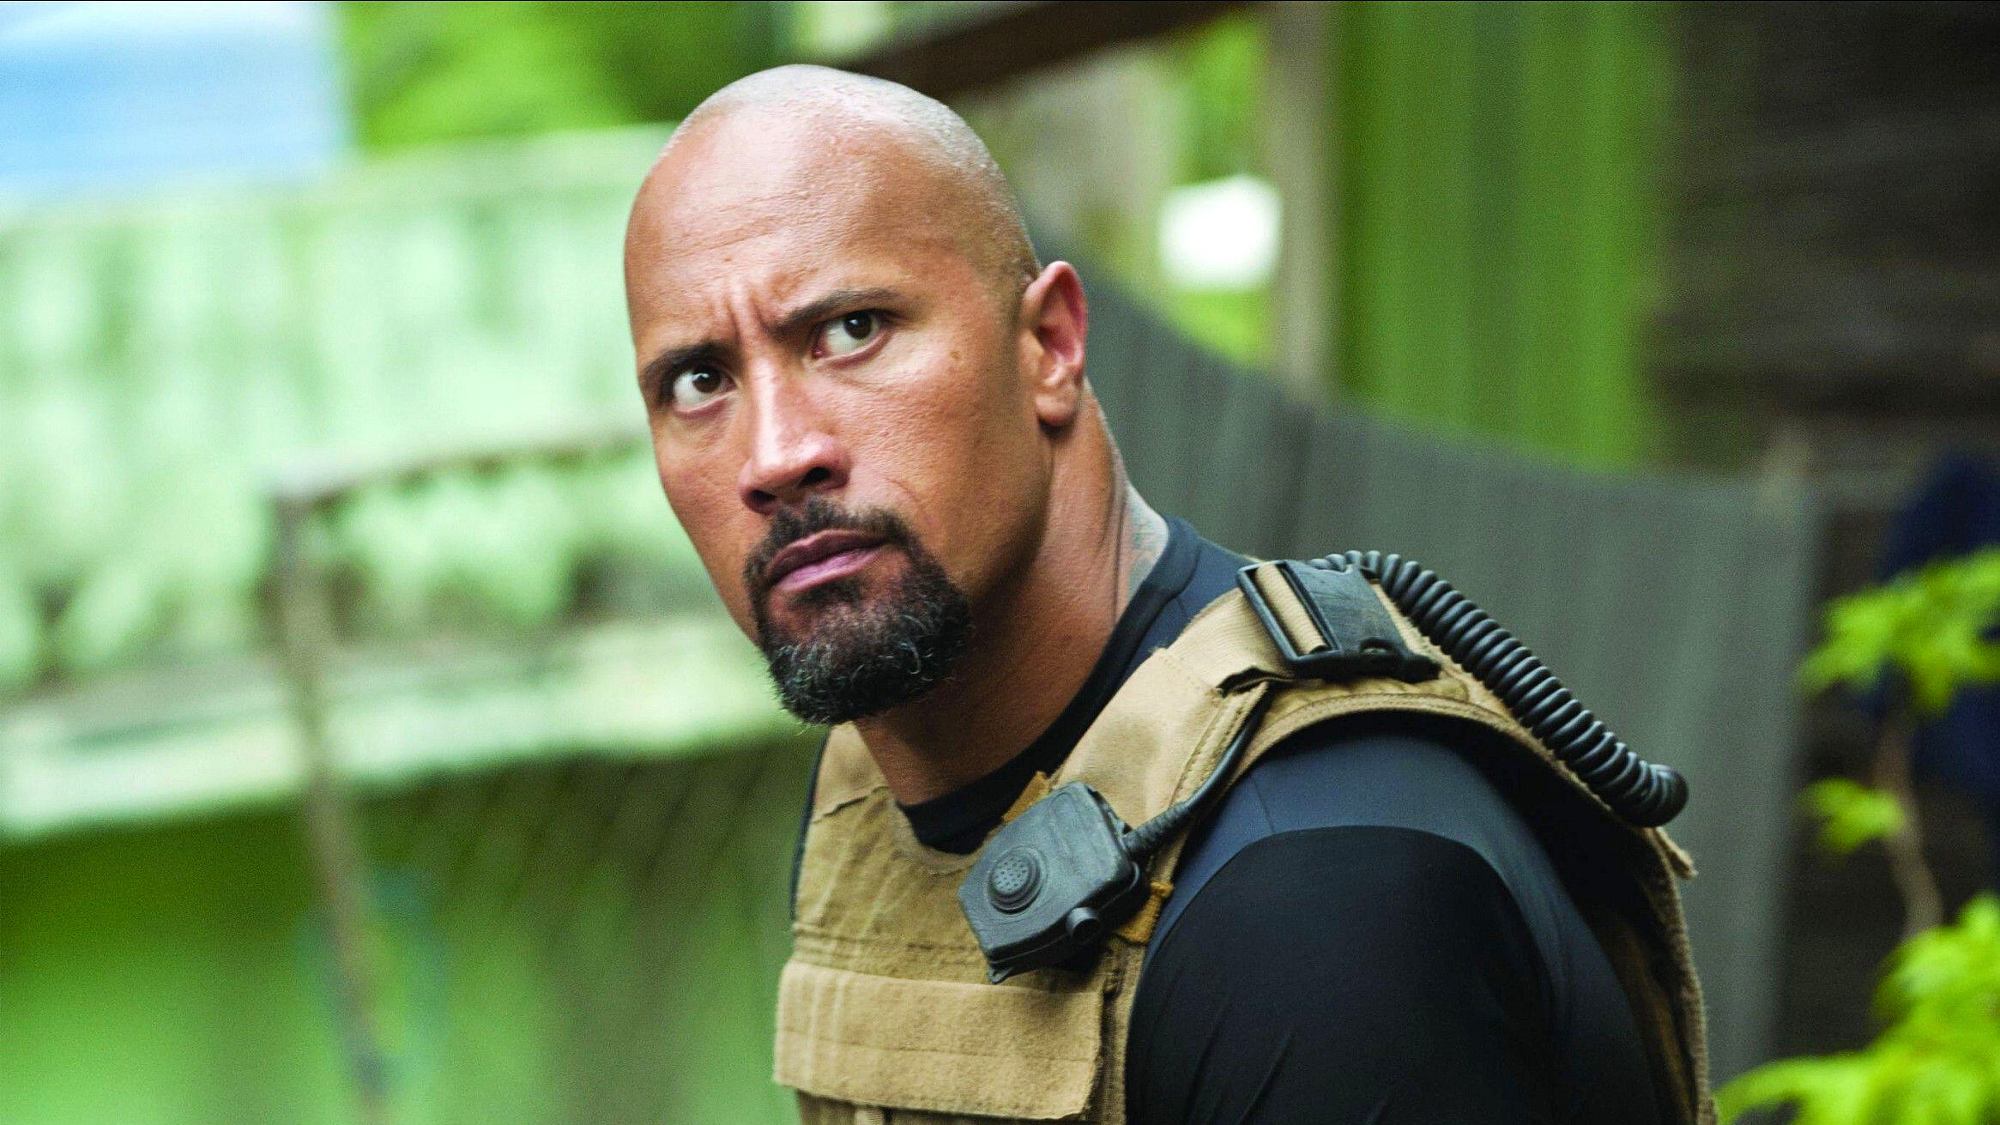 Before Skyscraper, take a look at top 5 Dwayne 'The Rock' Johnson movies